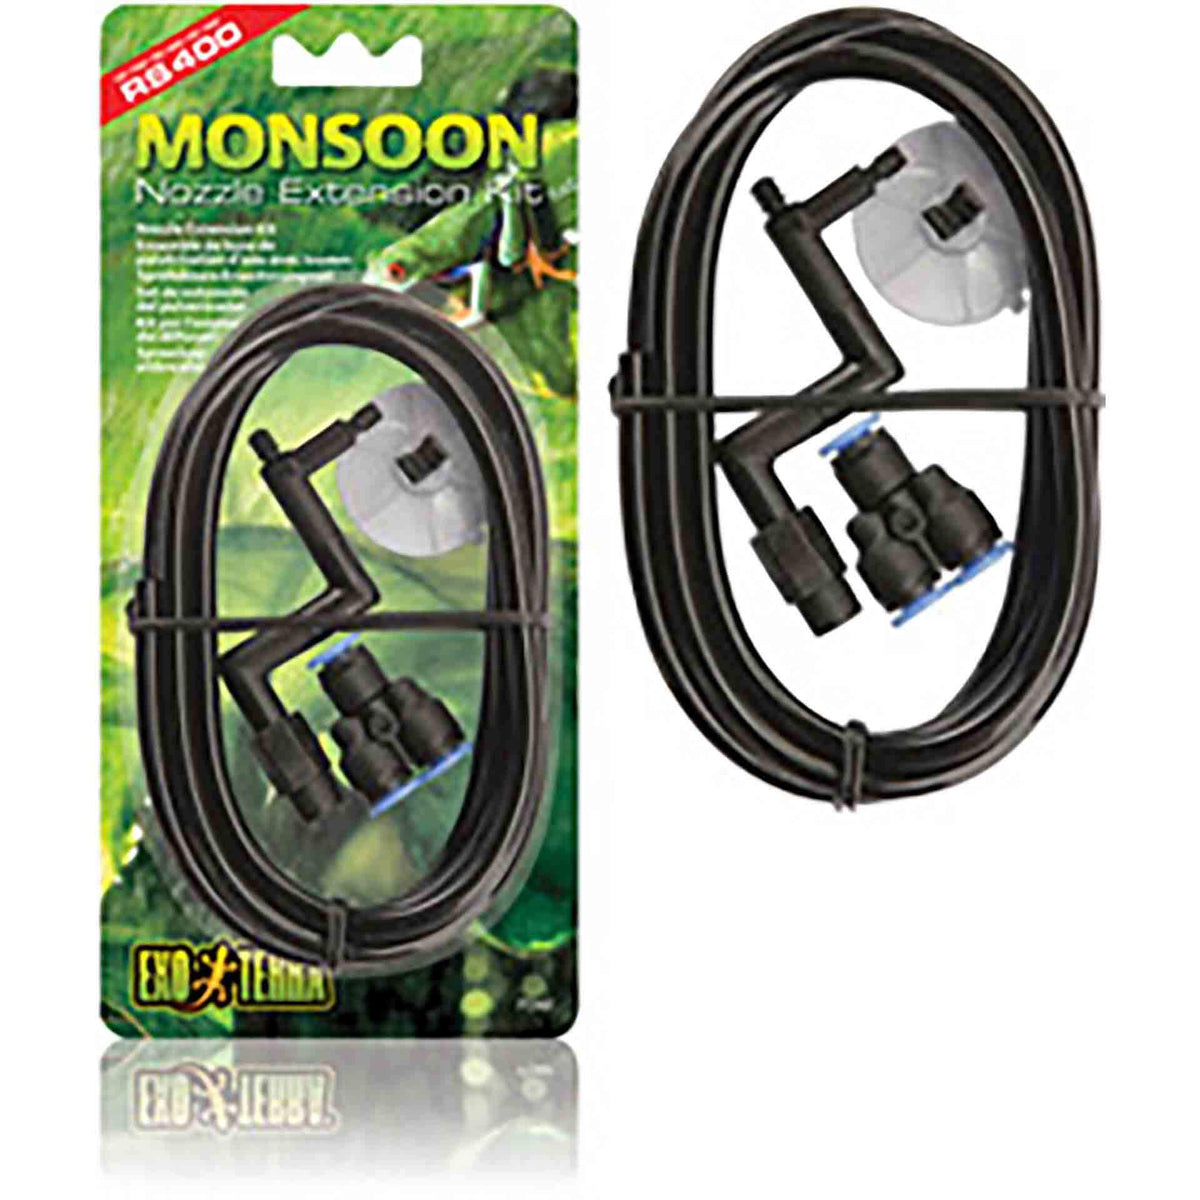 Exo Terra Monsoon Reptile Mister Replacement Output Tube Kit